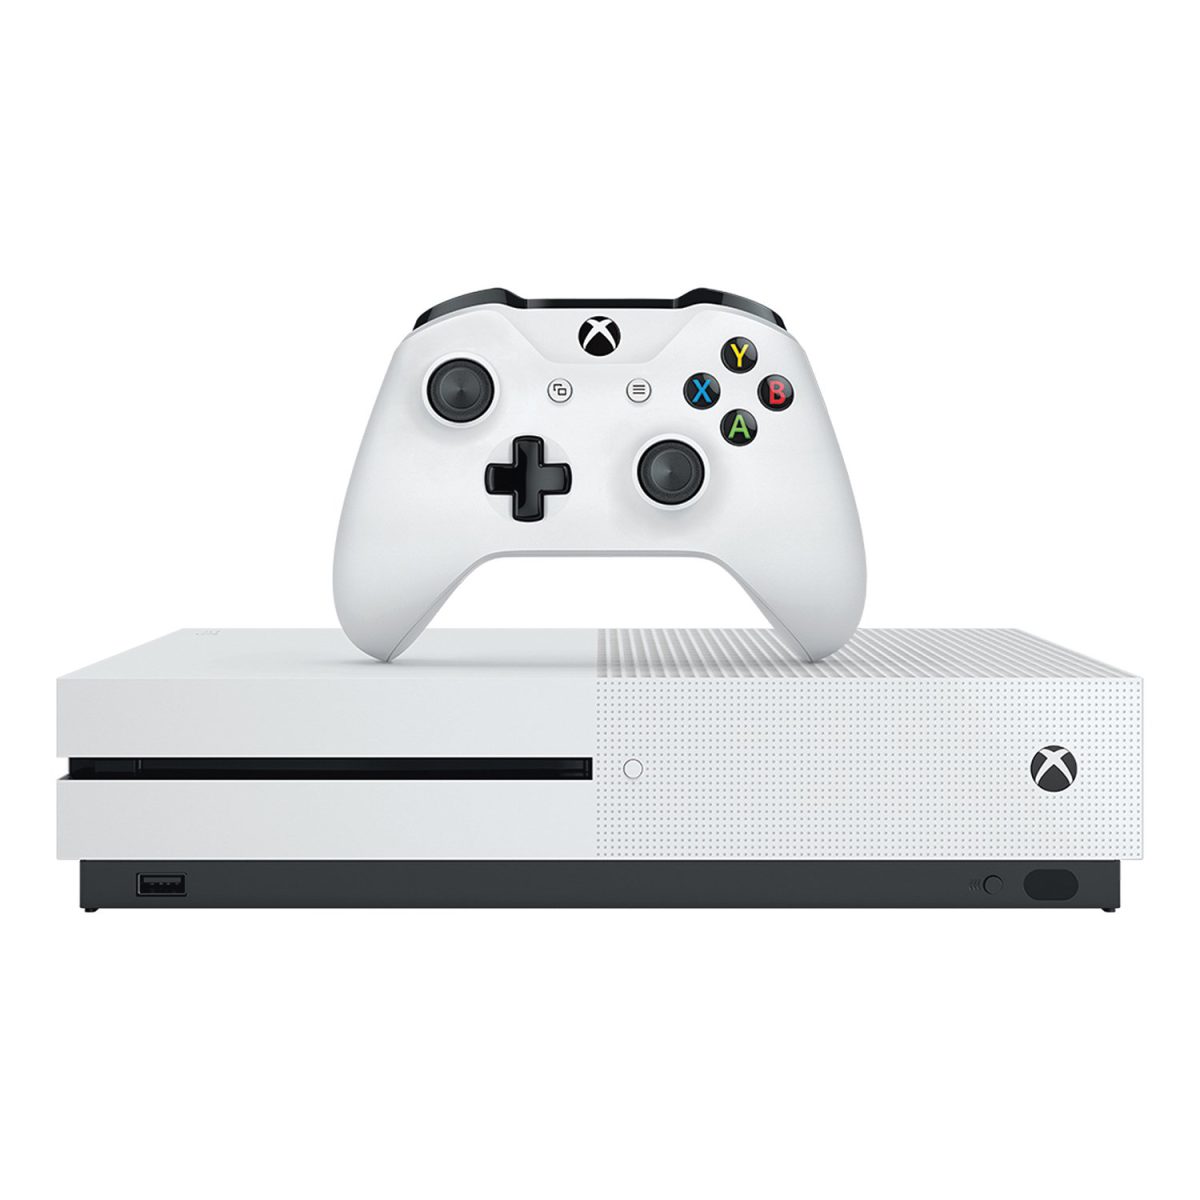 Microsoft Xbox One S Console with one Joystick (Used)